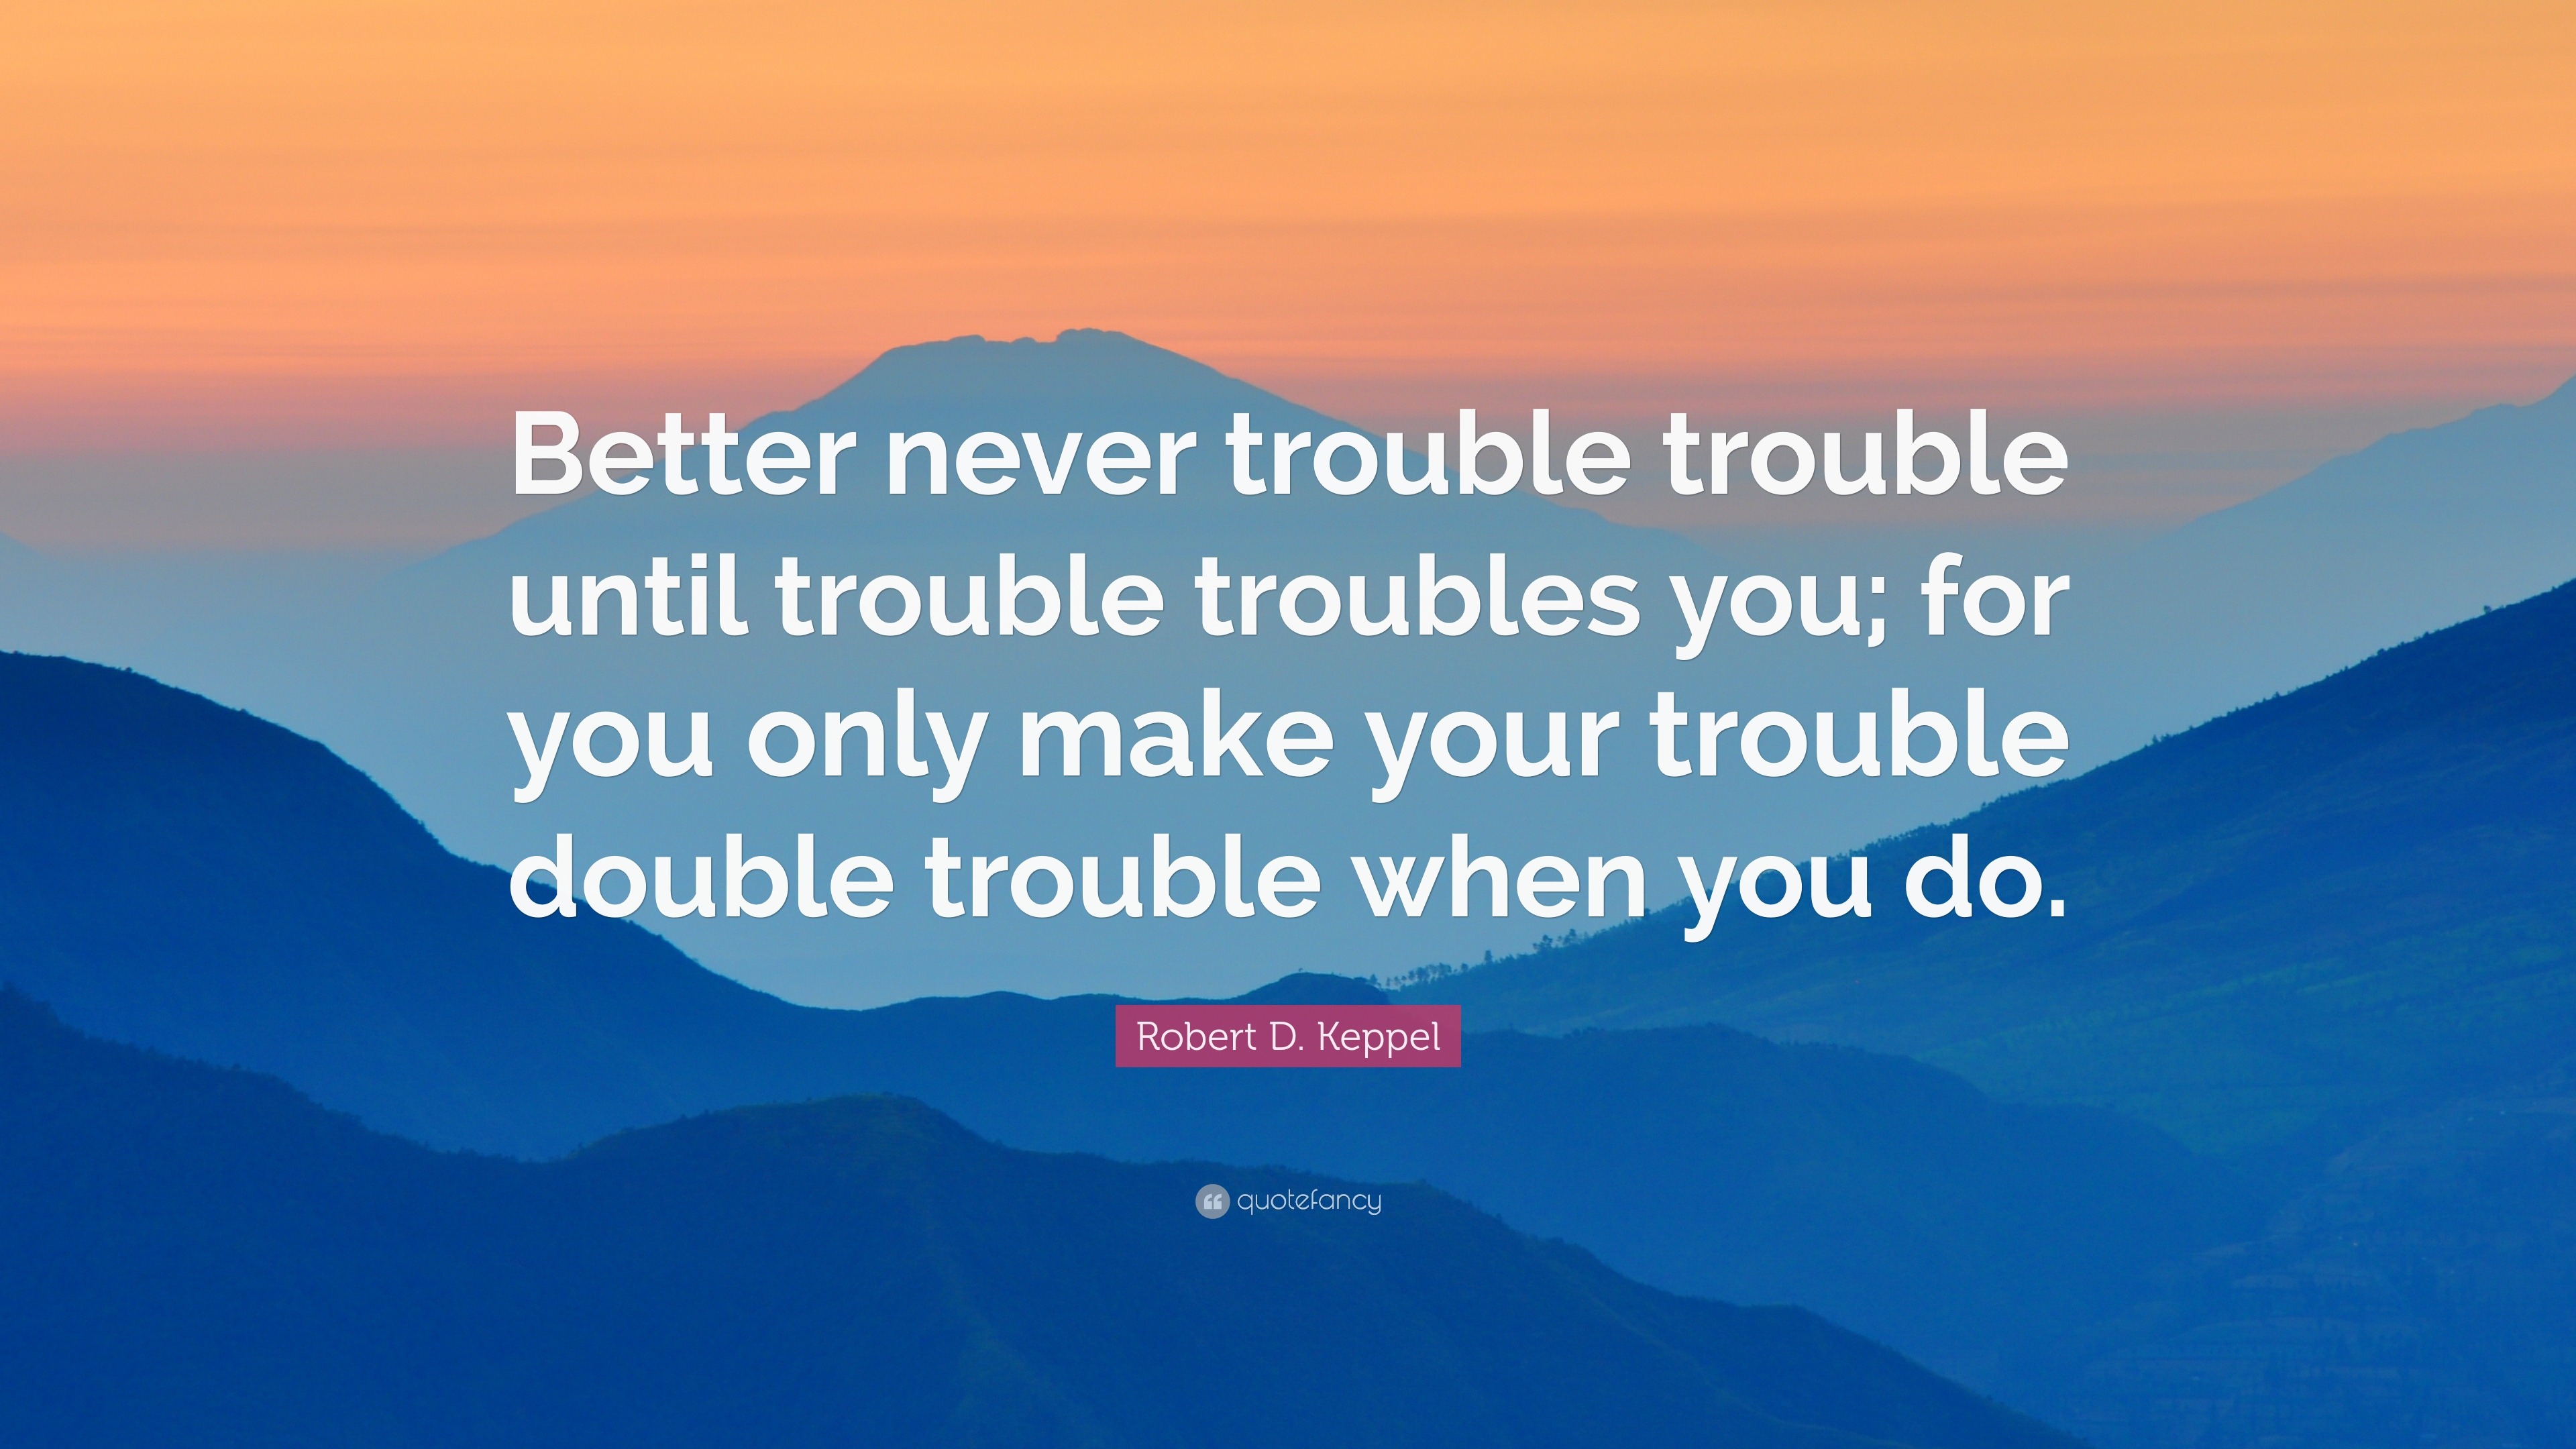 Robert D Keppel Quote Better Never Trouble Trouble Until Trouble Troubles You For You Only Make